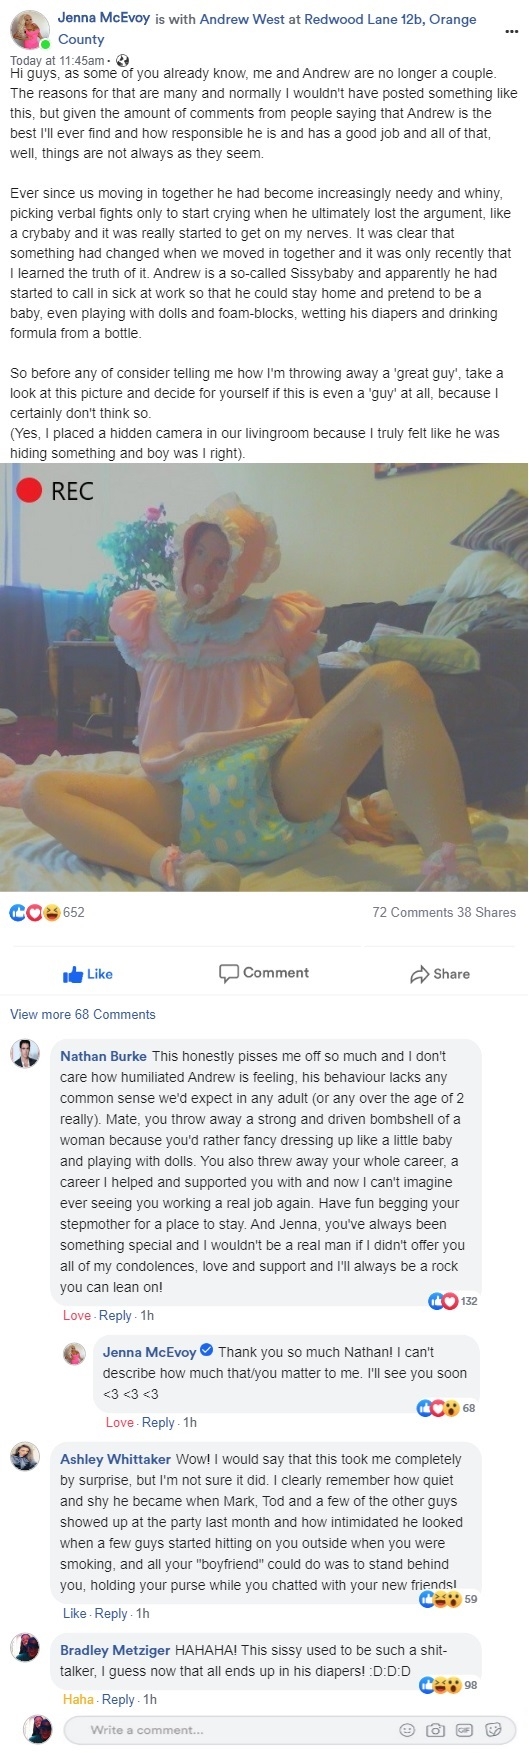 Sissybaby humiliation - Facebook can be dangerous, diaper,sissy,sissybaby,abdl,humiliation,femdom,facebook,caption, Adult Babies,Diaper Lovers,Dolled Up,Pop Culture,Sissy Fashion,Feminization,Thumb Sucking